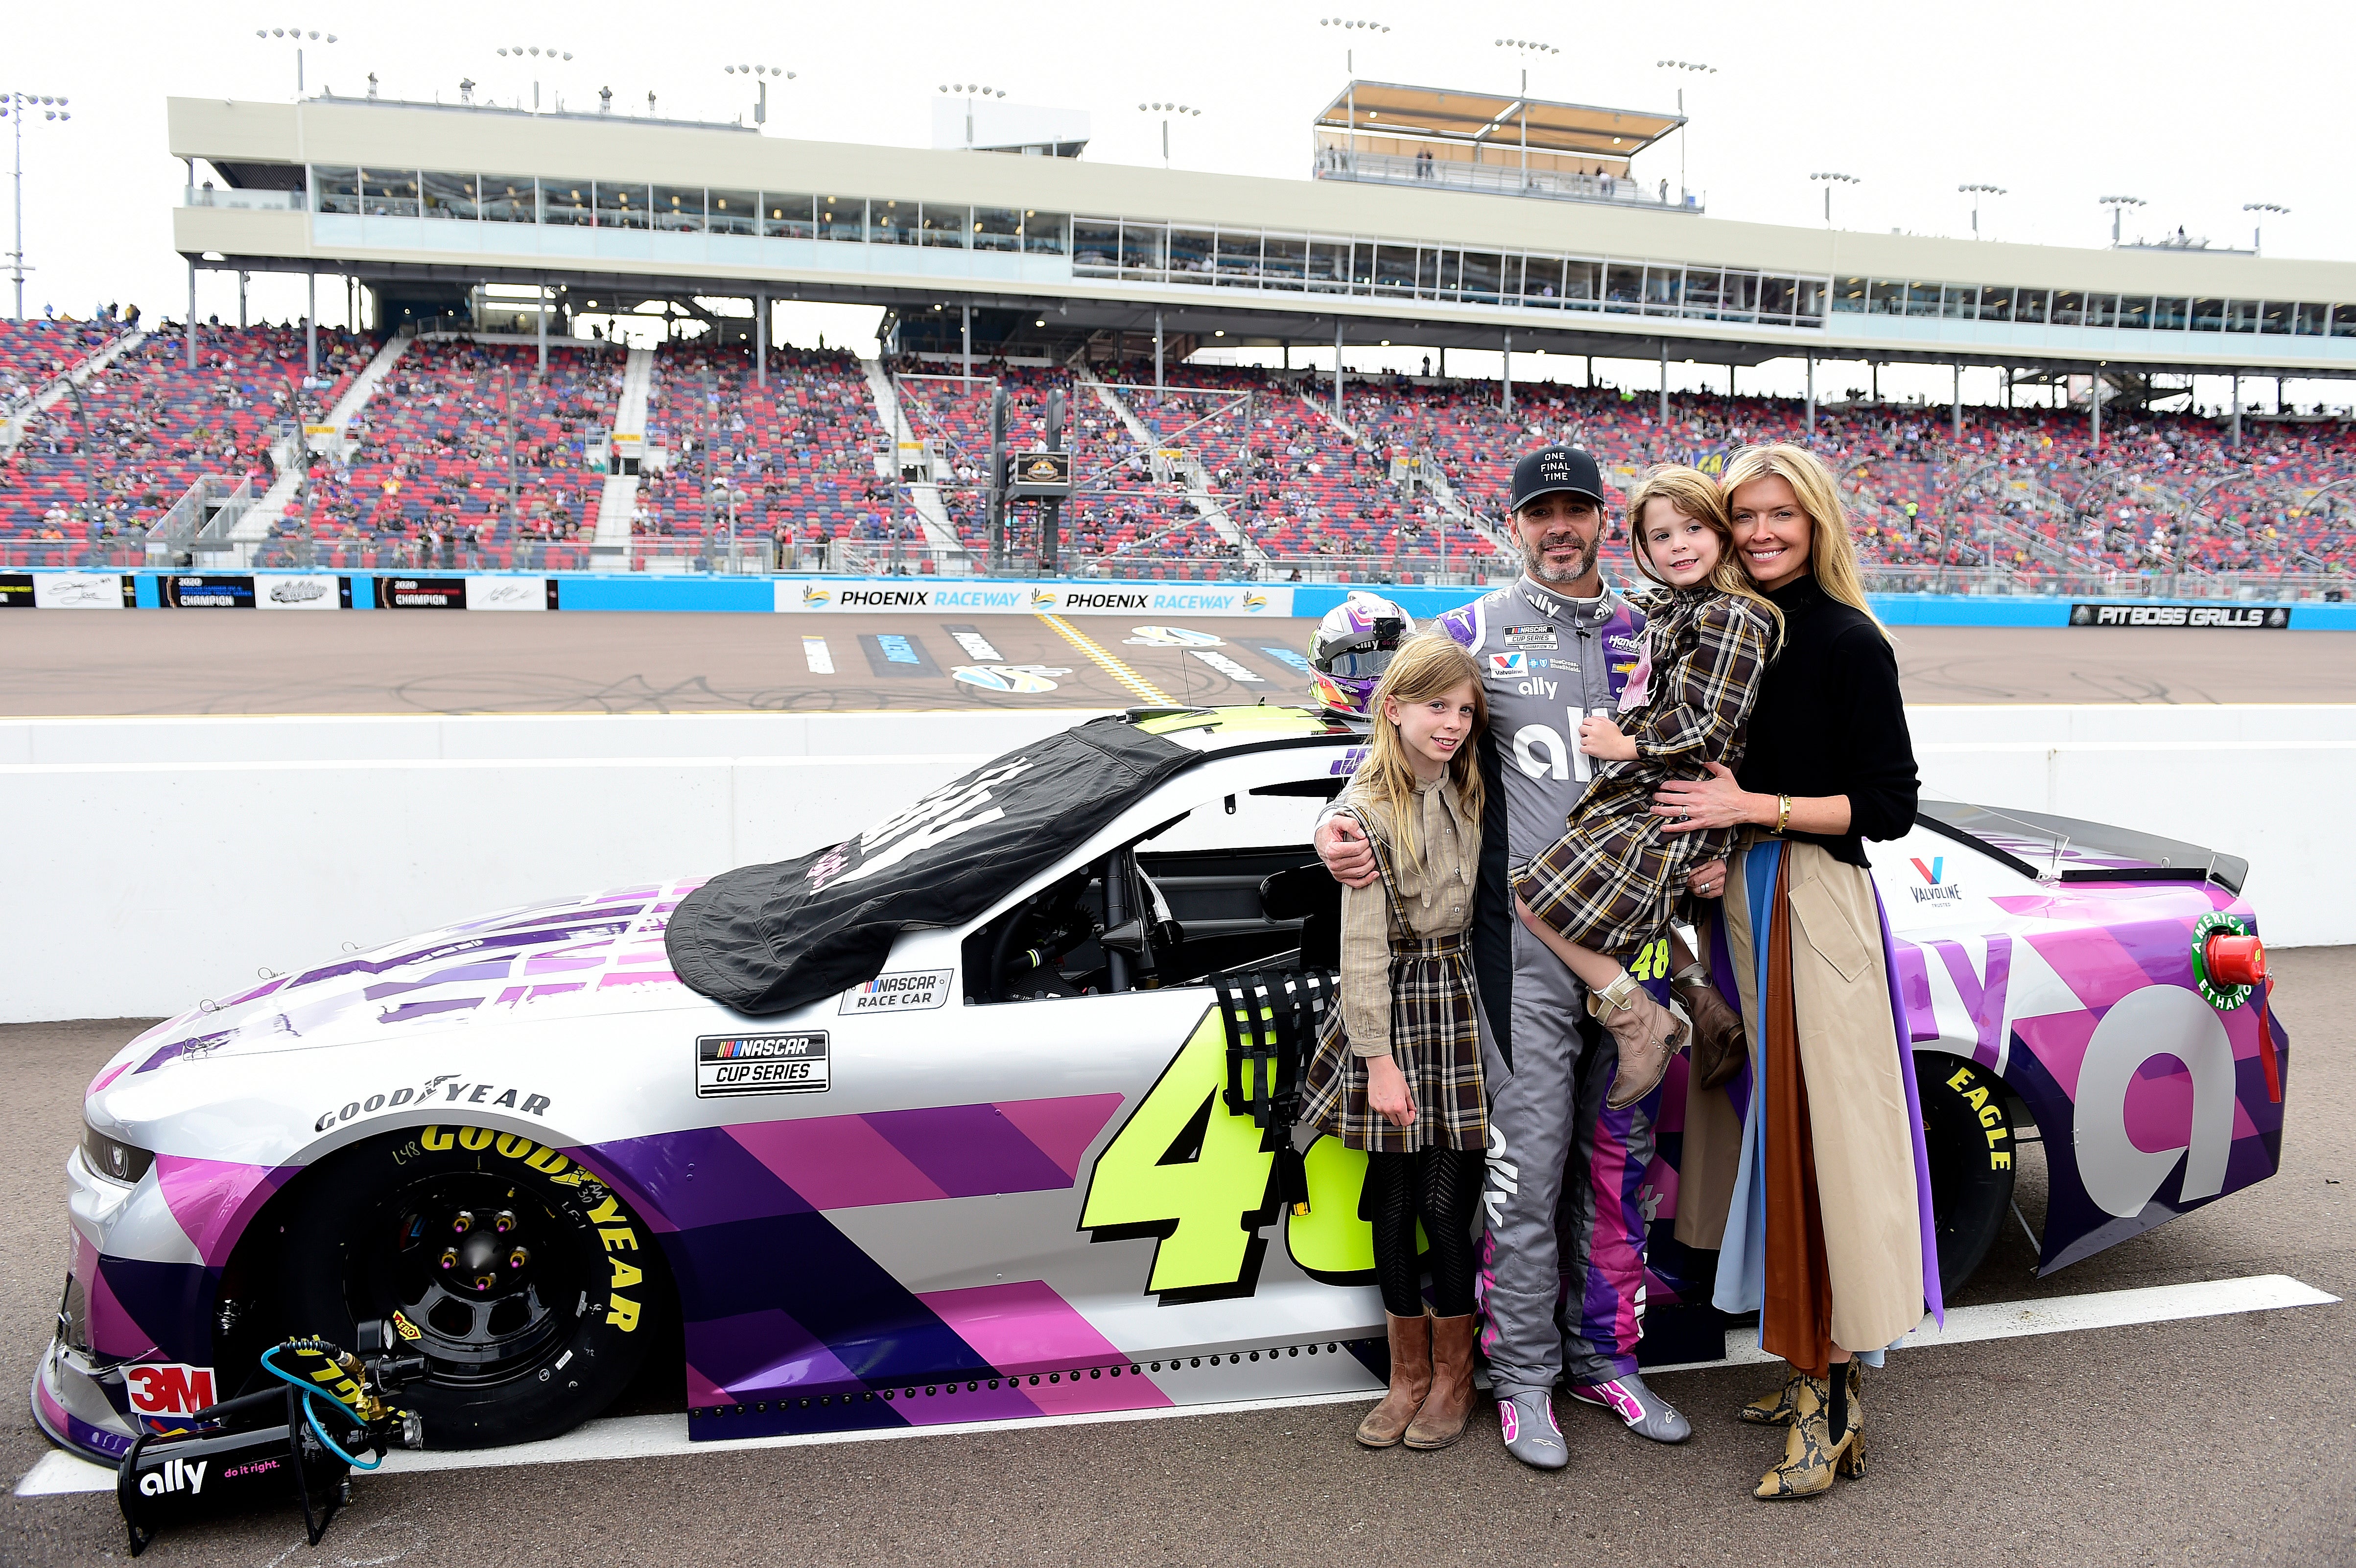 Jimmie Johnson, driver of the #48 Ally Chevrolet, poses on the grid with his wife Chandra Johnson and their daughters Lydia Norriss Johnson and Genevieve Johnson prior to the NASCAR Cup Series Season Finale 500 at Phoenix Raceway on November 08, 2020 in Avondale, Arizona.